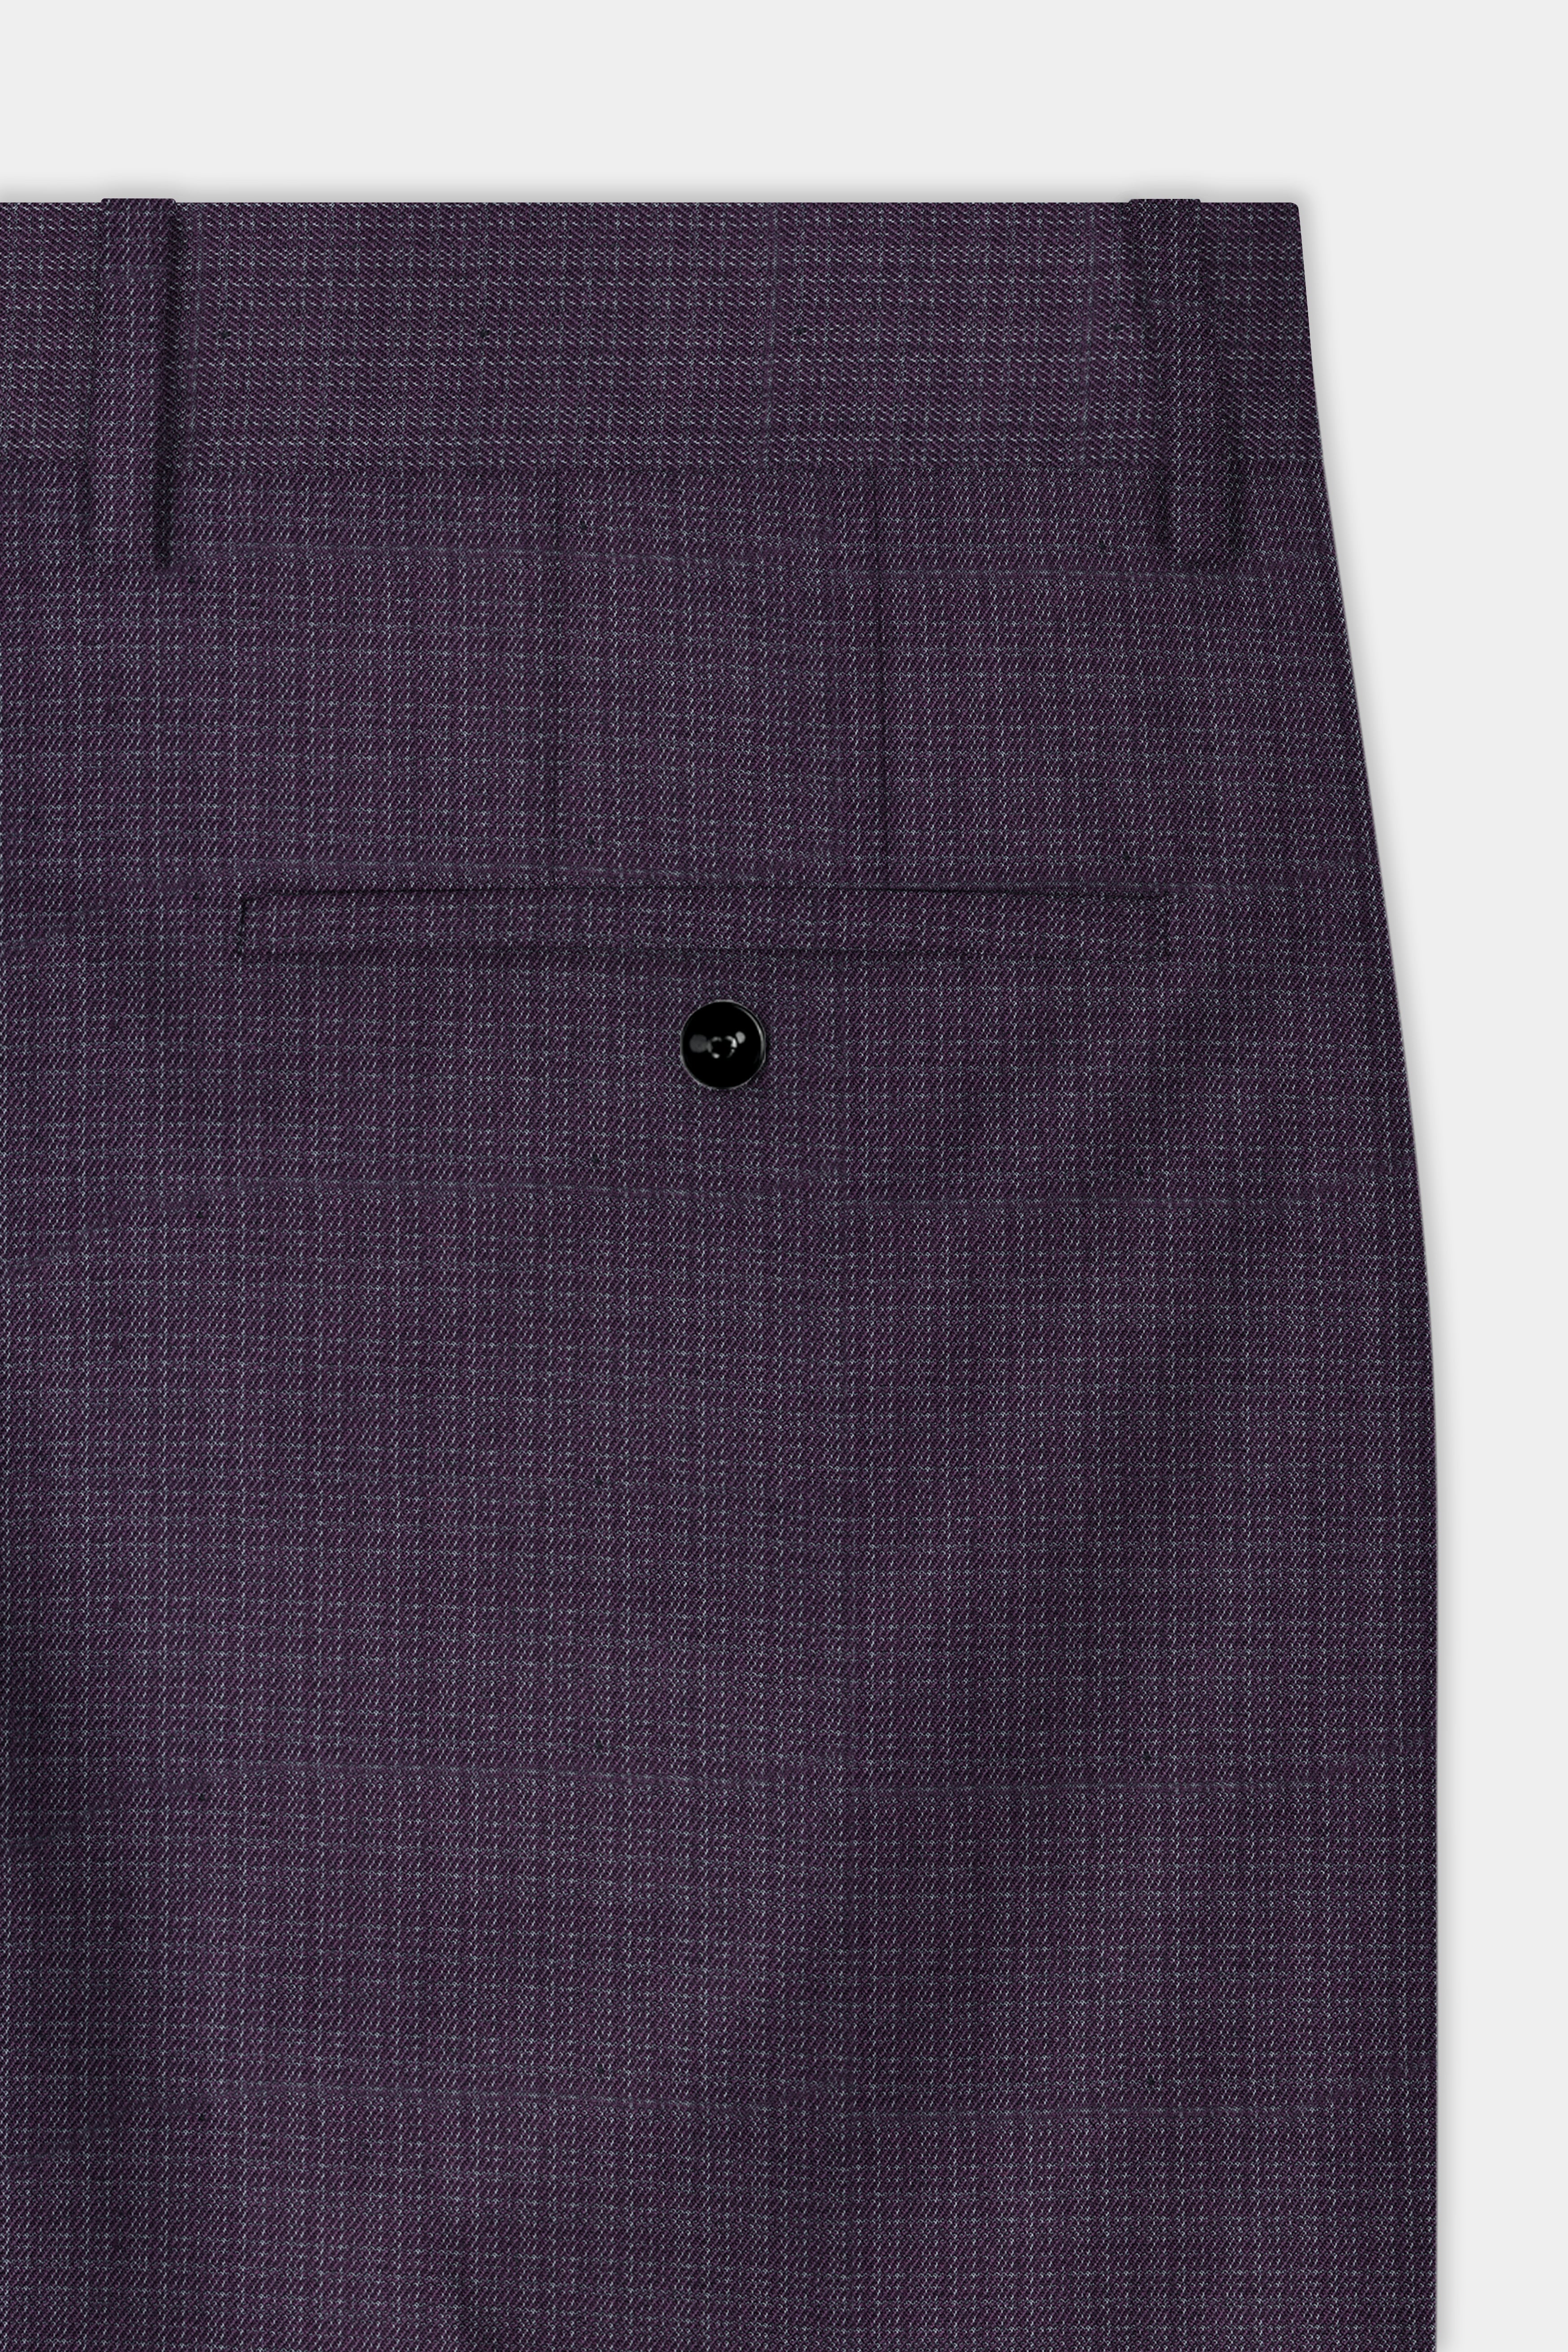 Blackcurrant Textured Wool Rich Pant